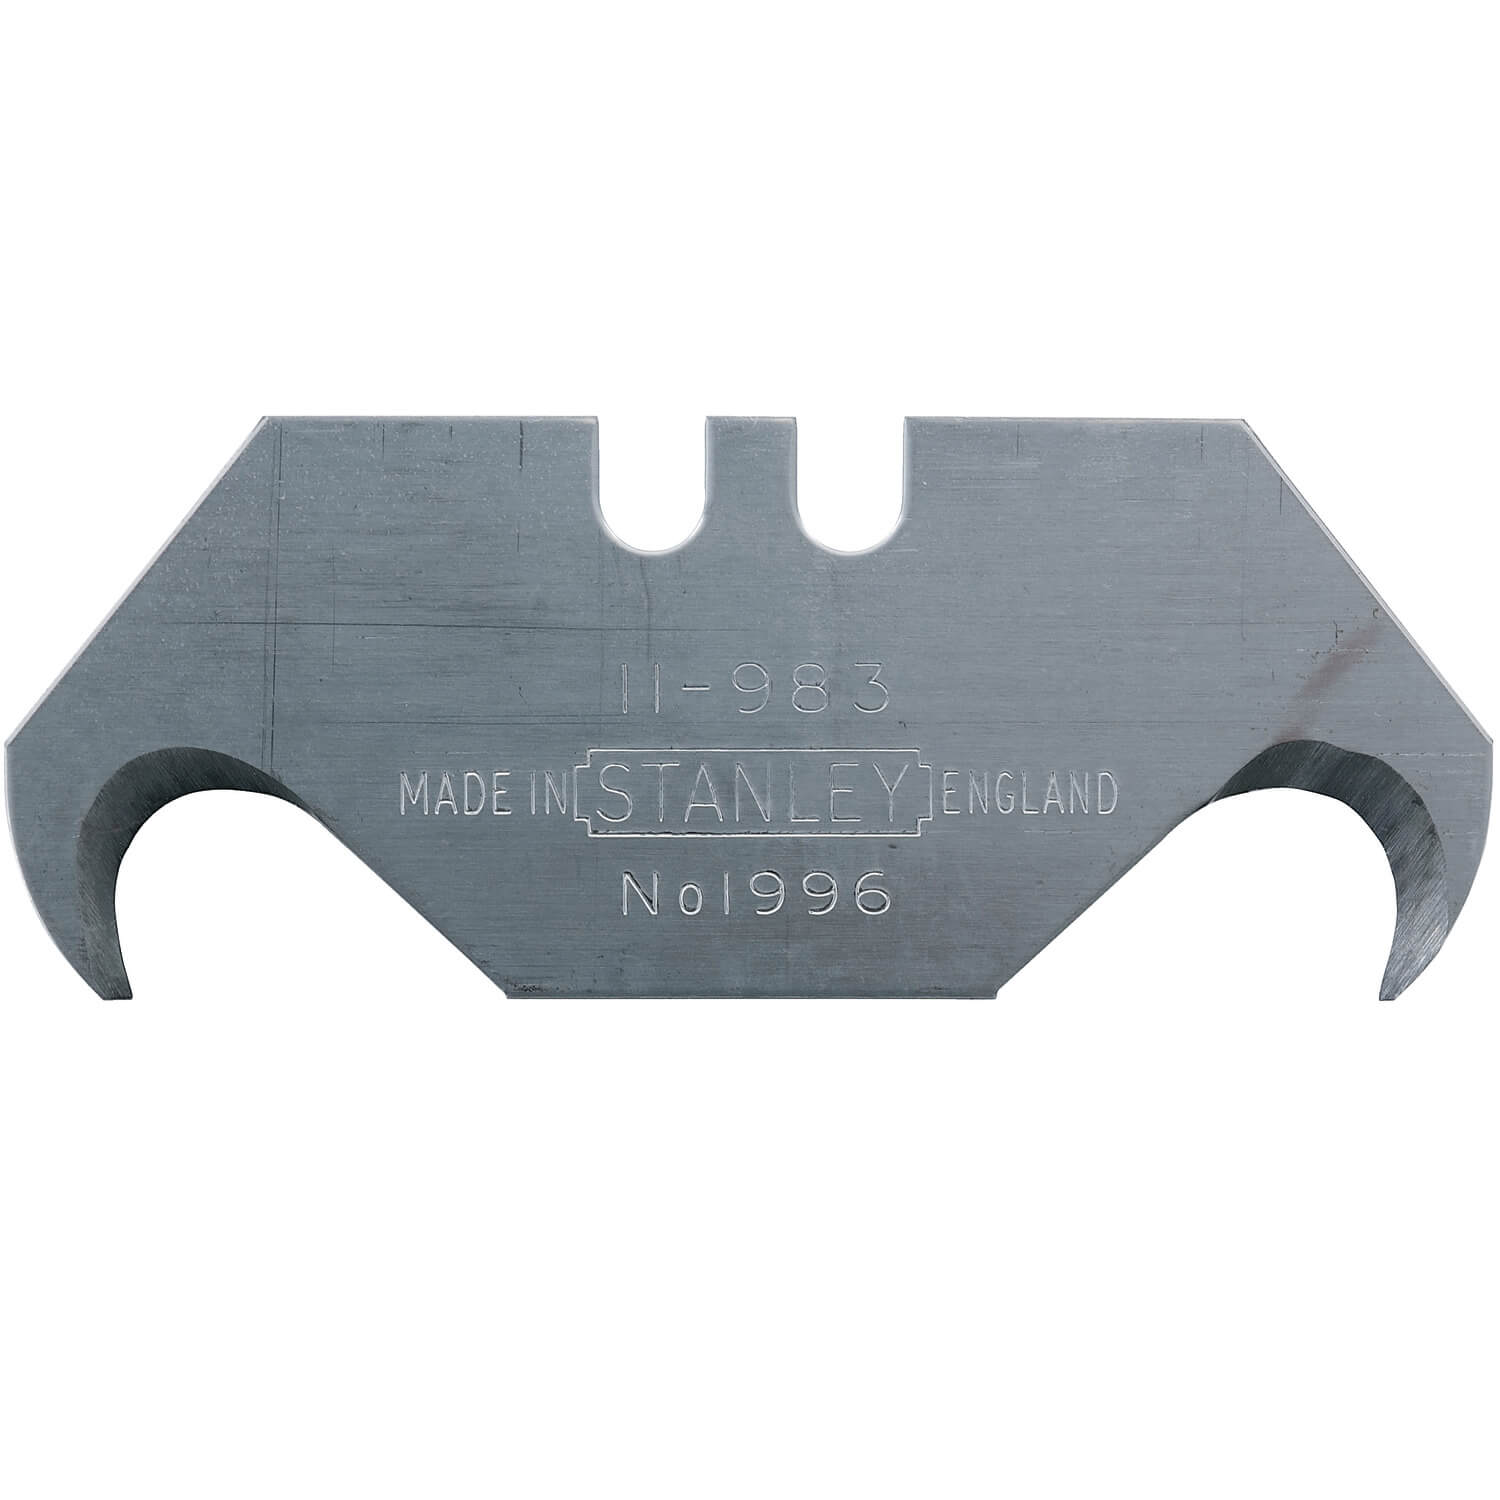 STANELY  11-983  -  5 PK 1996™ LARGE HOOK BLADE - wise-line-tools